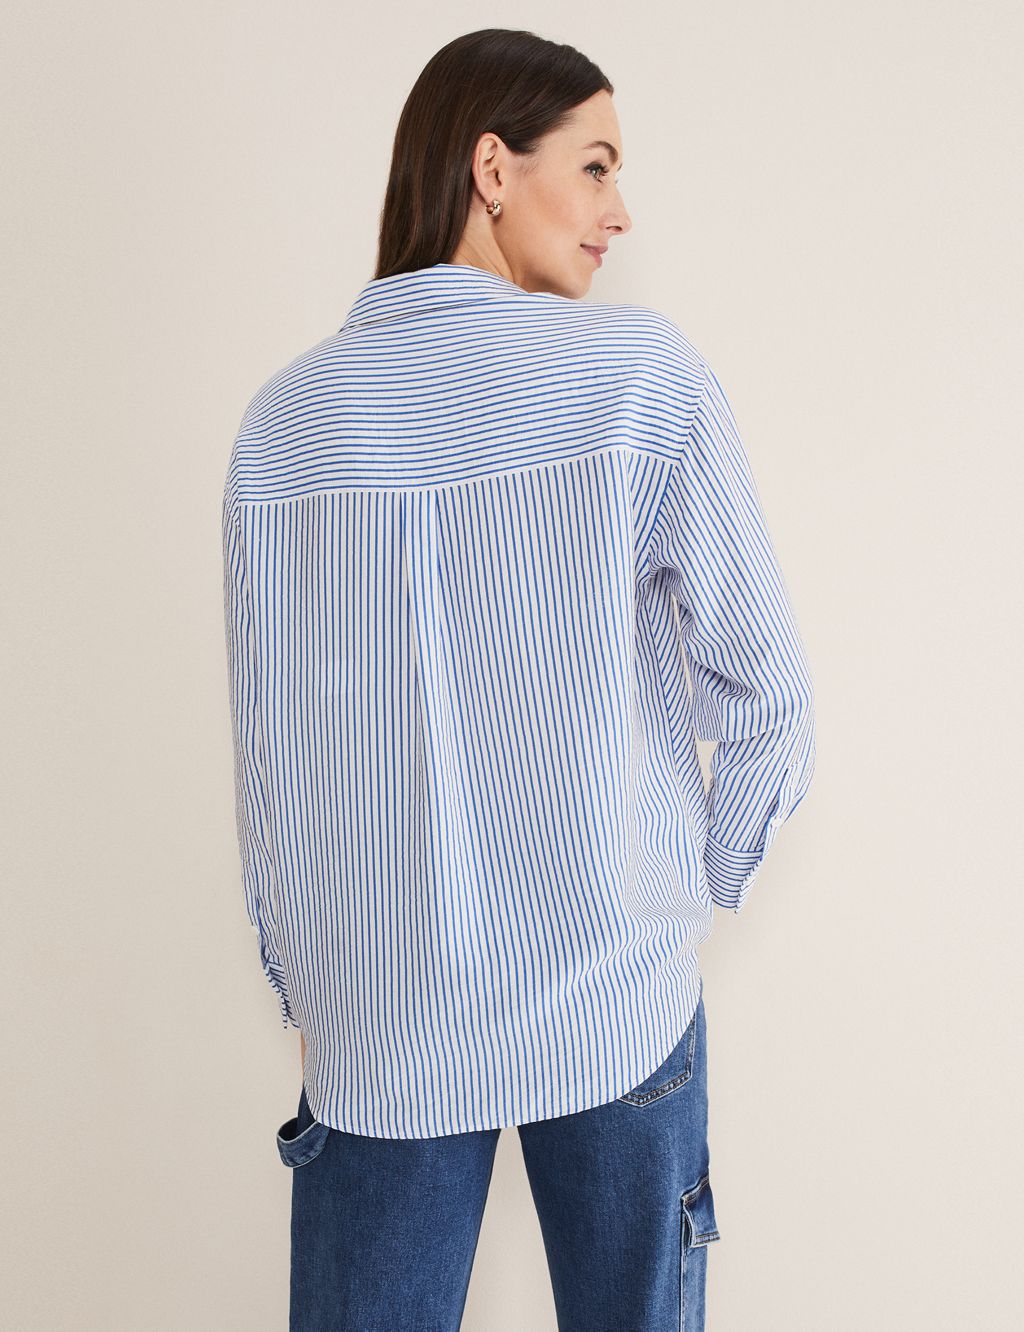 Striped Collared Shirt image 4